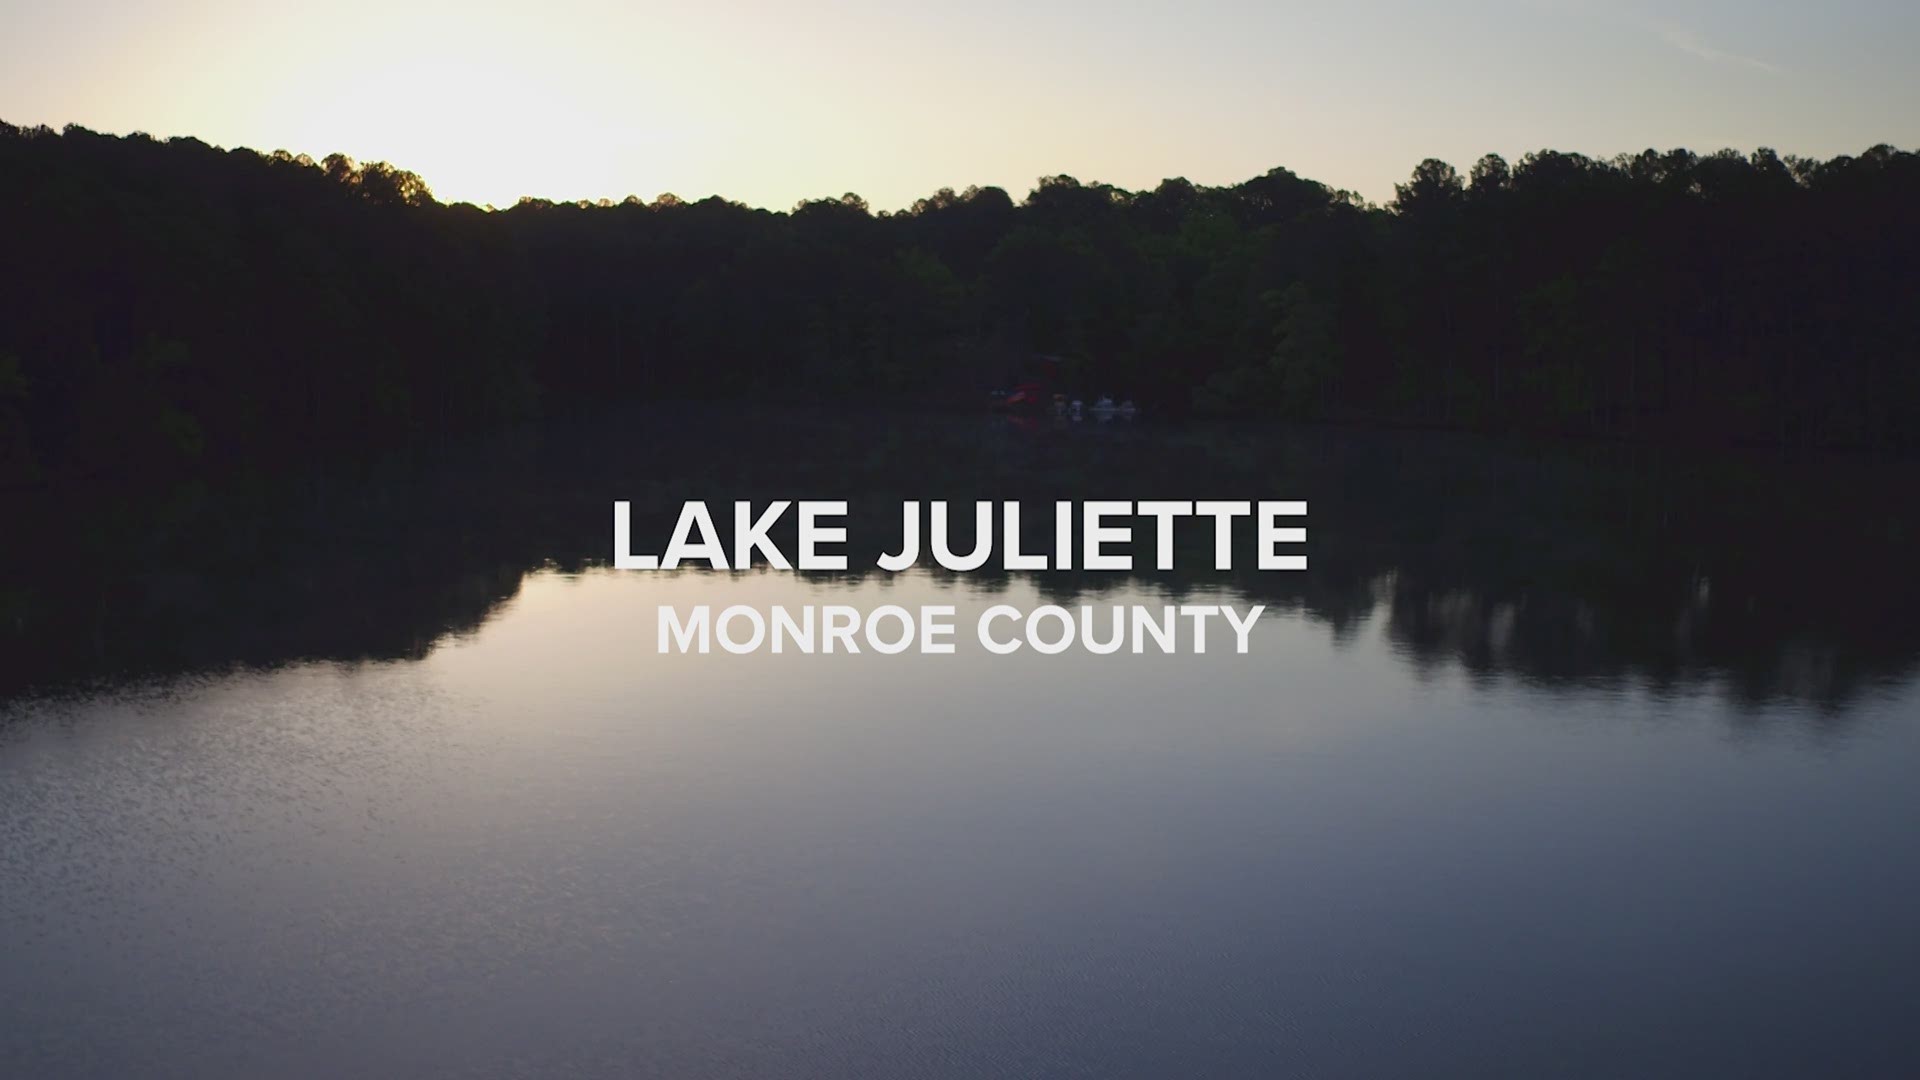 This week's Sunrise Snap is from Lake Juliette in Monroe County. Boating restrictions keep the lake quiet and clear, and make it a favorite spot for serious fishermen.